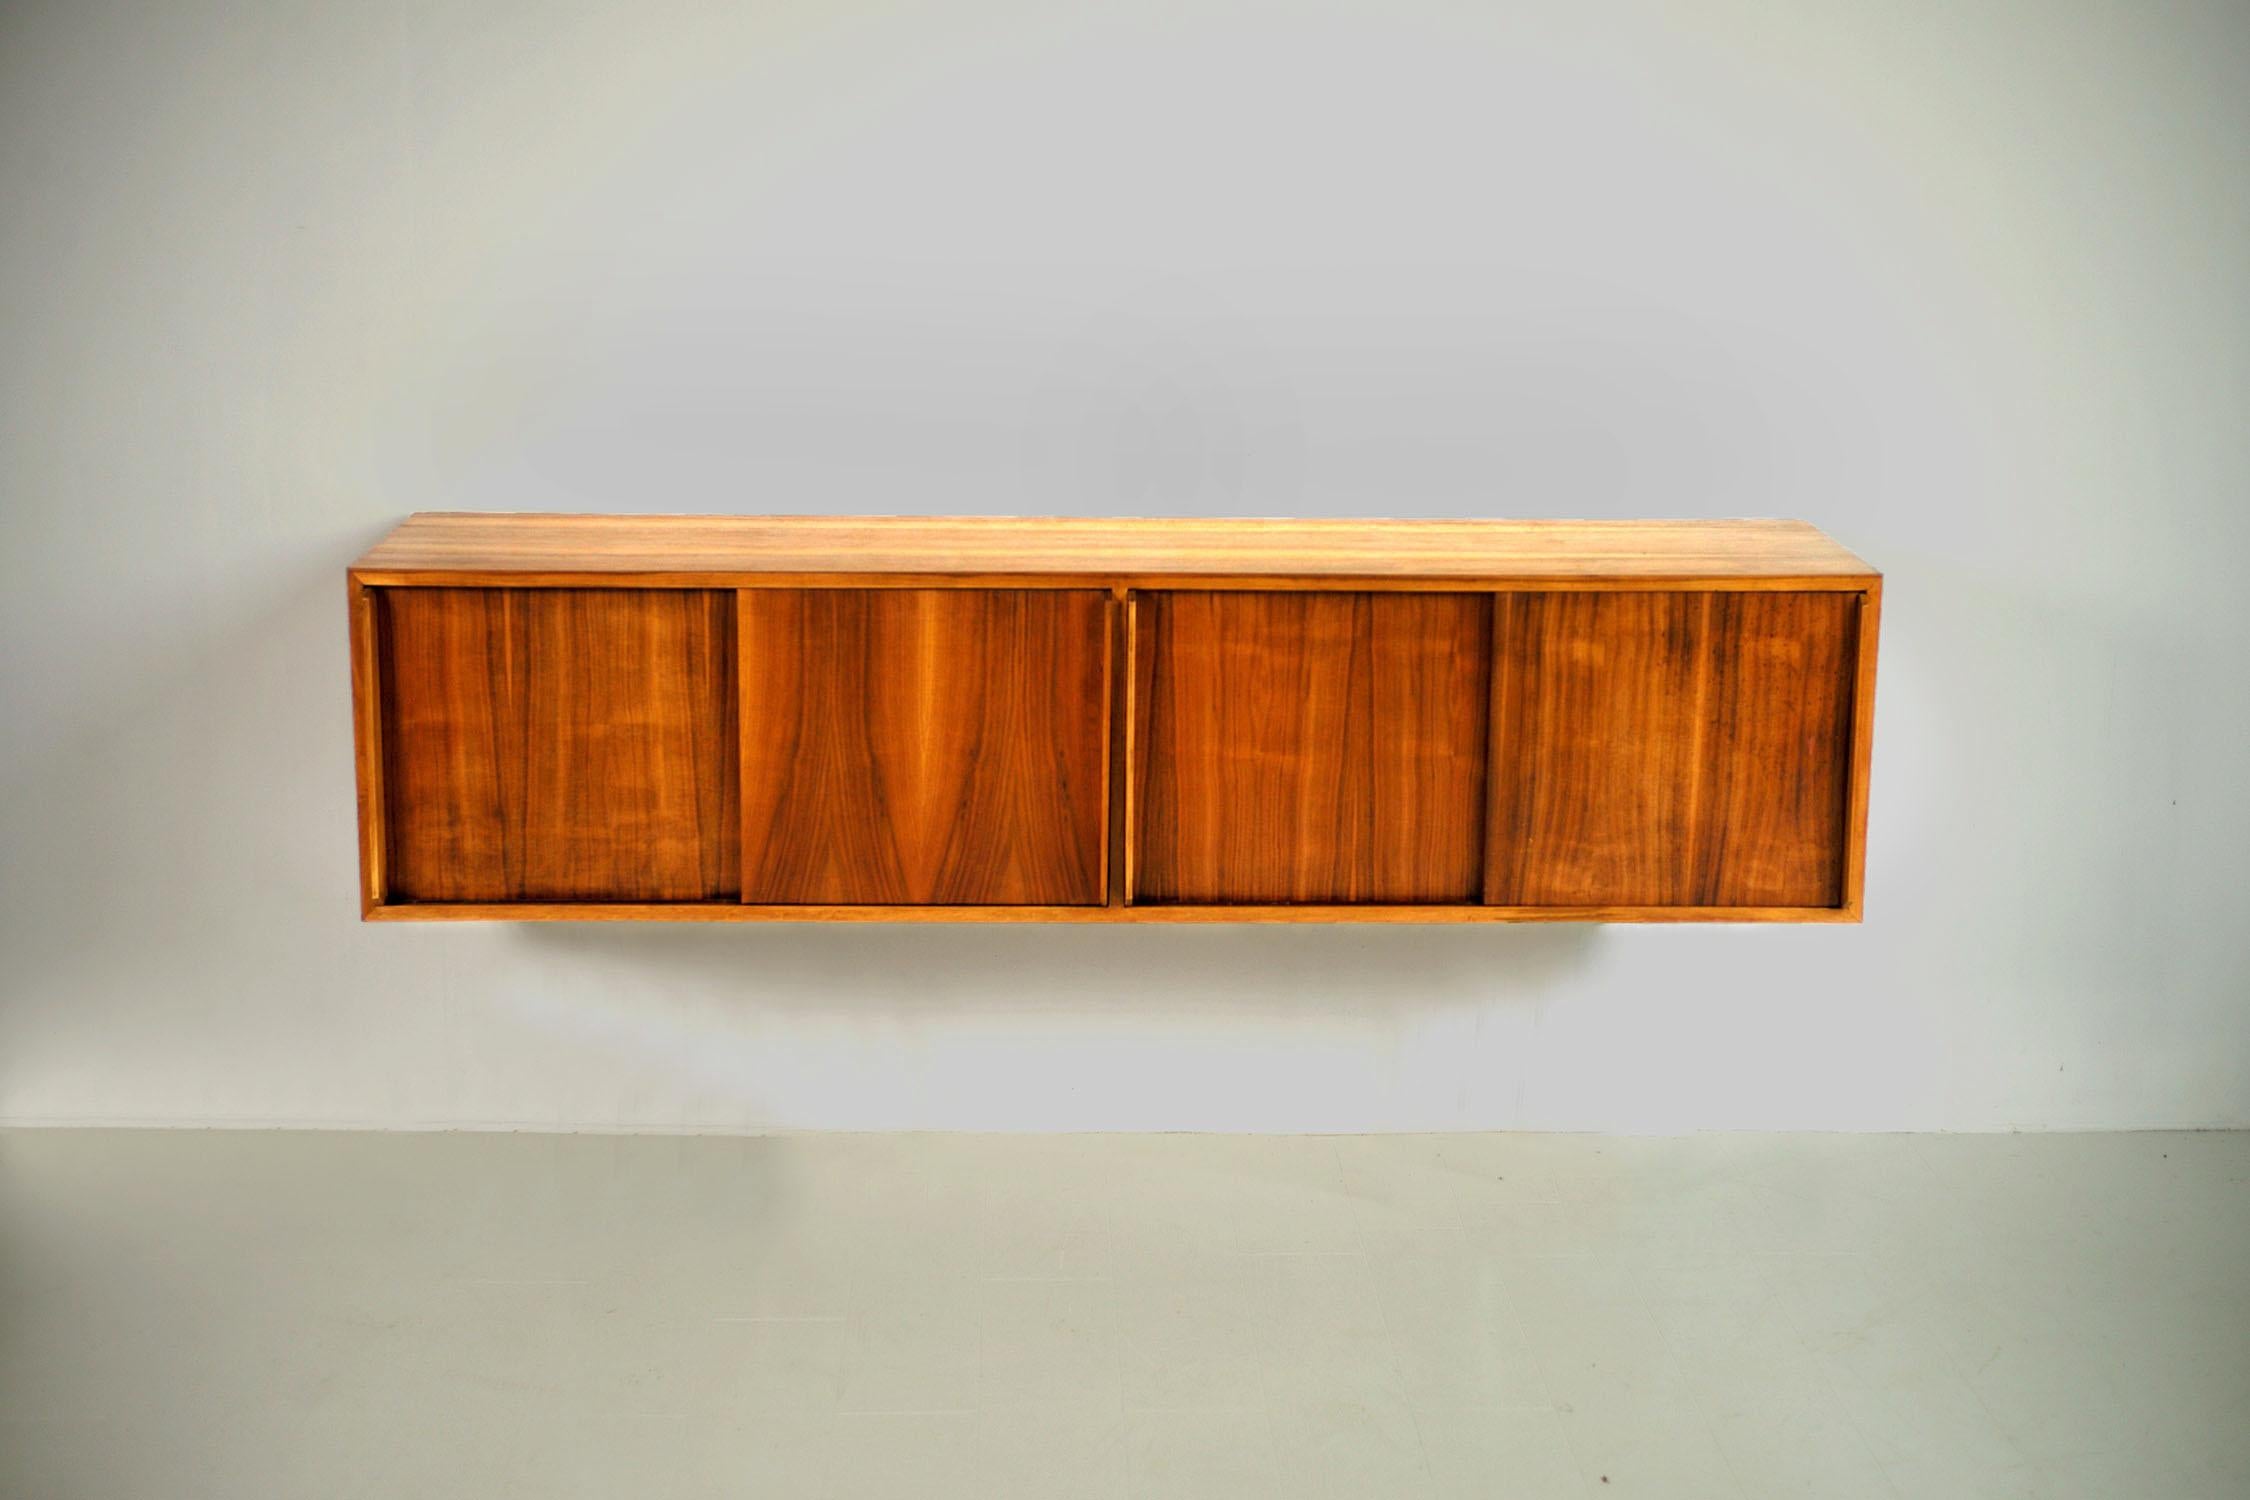 Suspended sideboard in blond flamed walnut, Italy 1955. Equipped with 4 sliding doors with large handles, a central shelf, this beautiful sideboard was part of the furniture of the first apartment-hotel founded in Ventimiglia in 1955. Equipped with